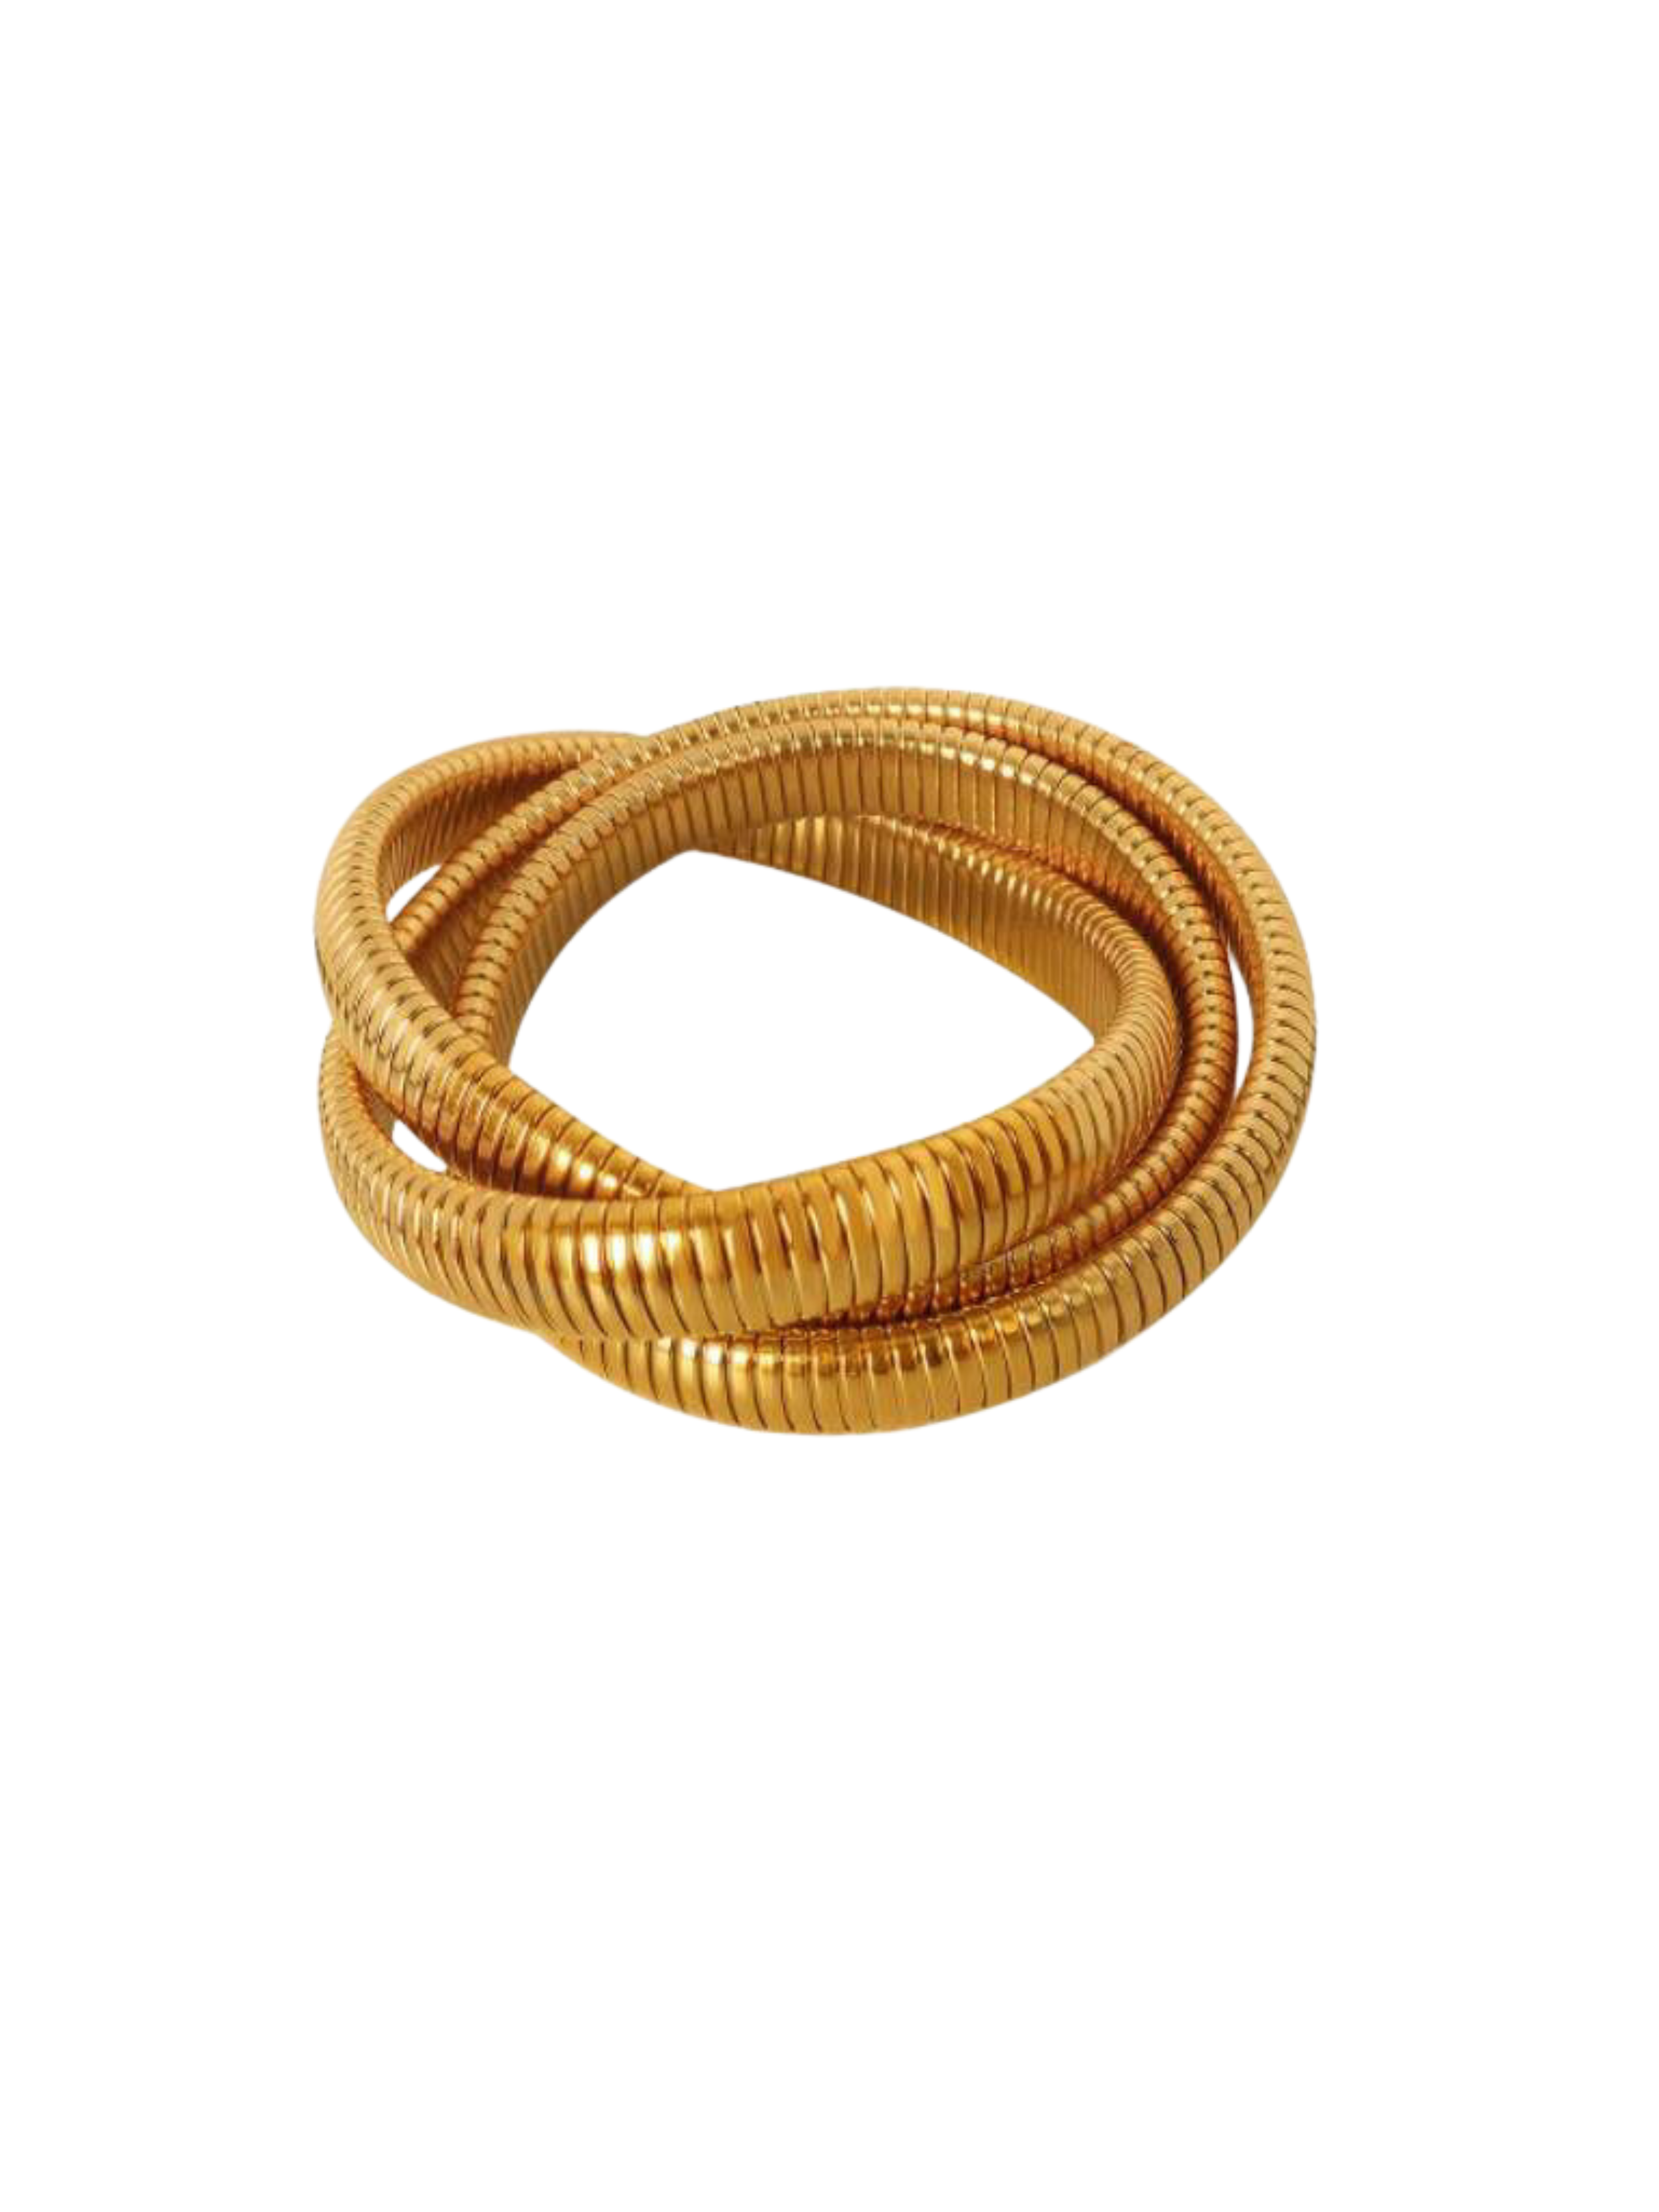 GOLDxTEAL triple band bracelet crafted from 18k gold plated stainless steel.